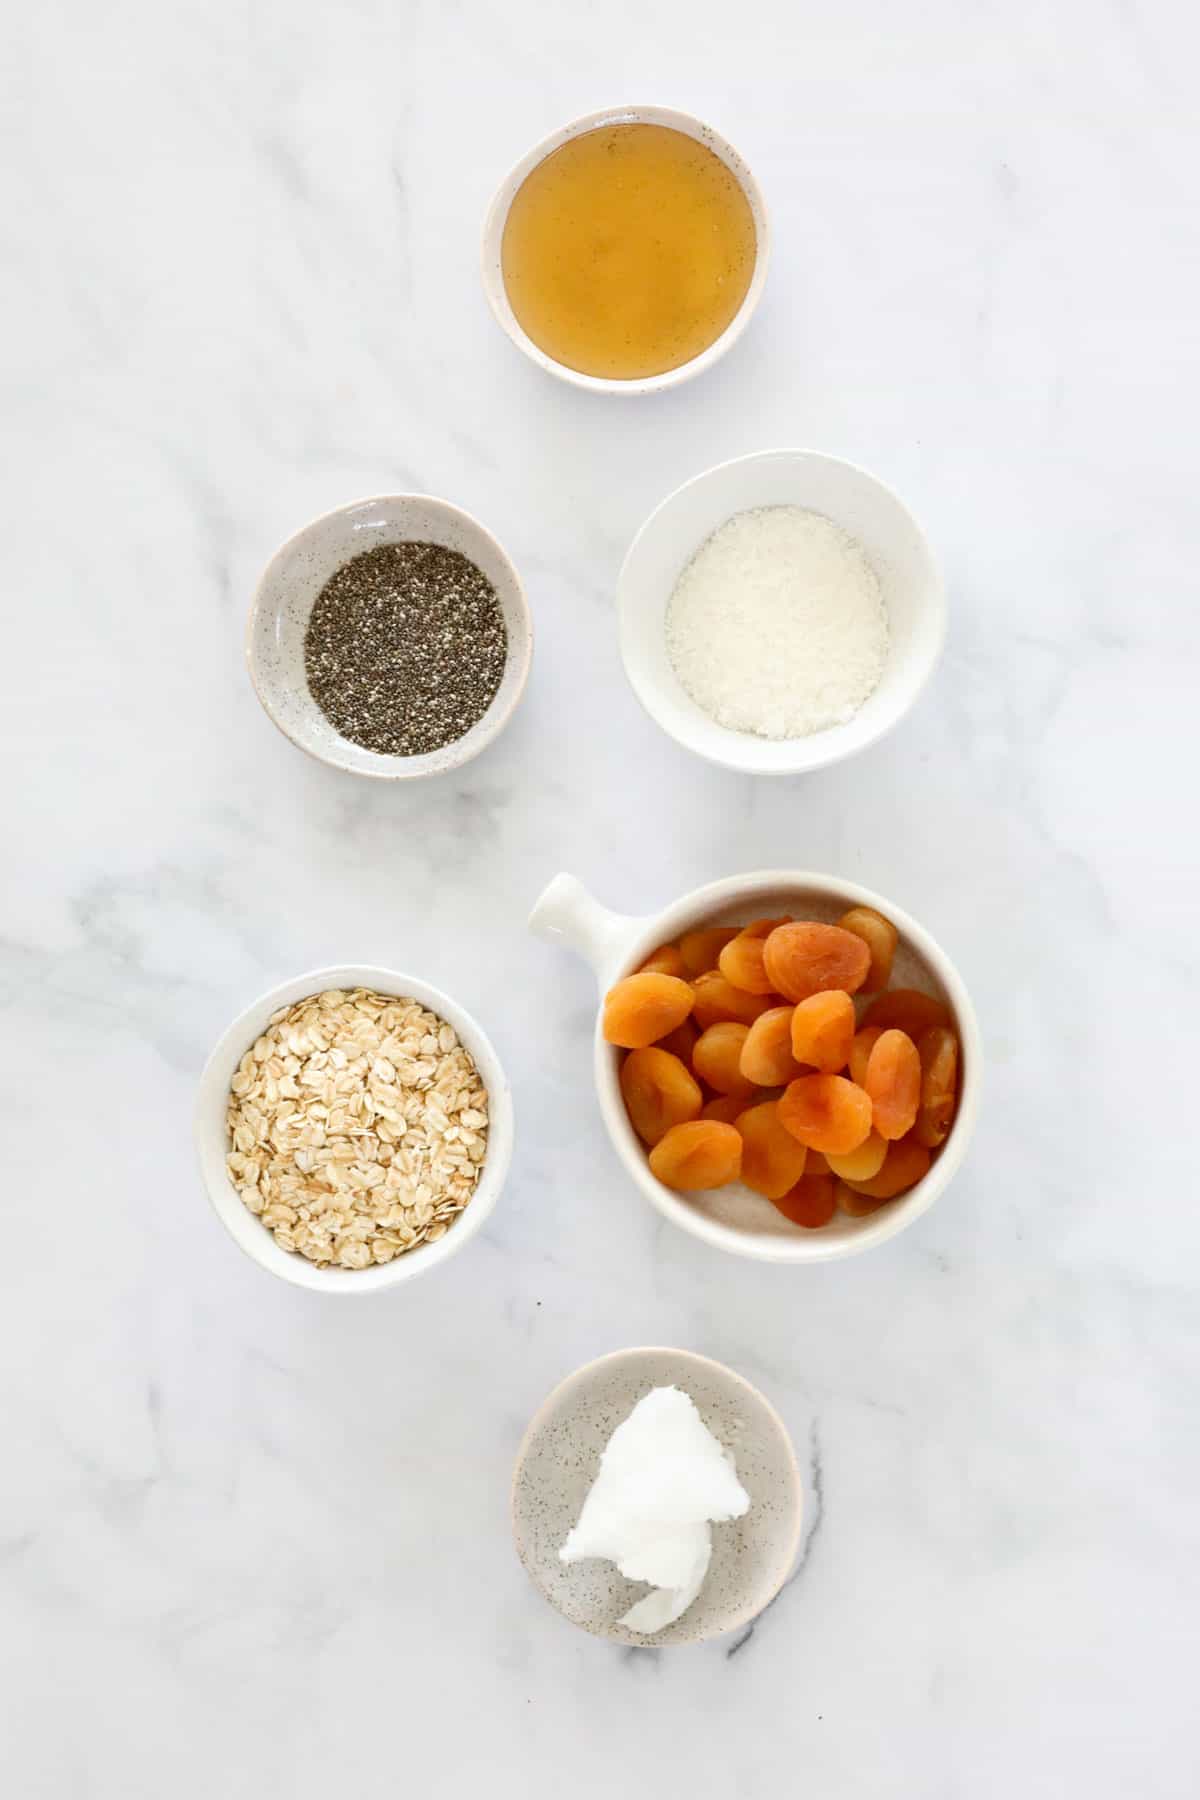 The ingredients for apricot balls.